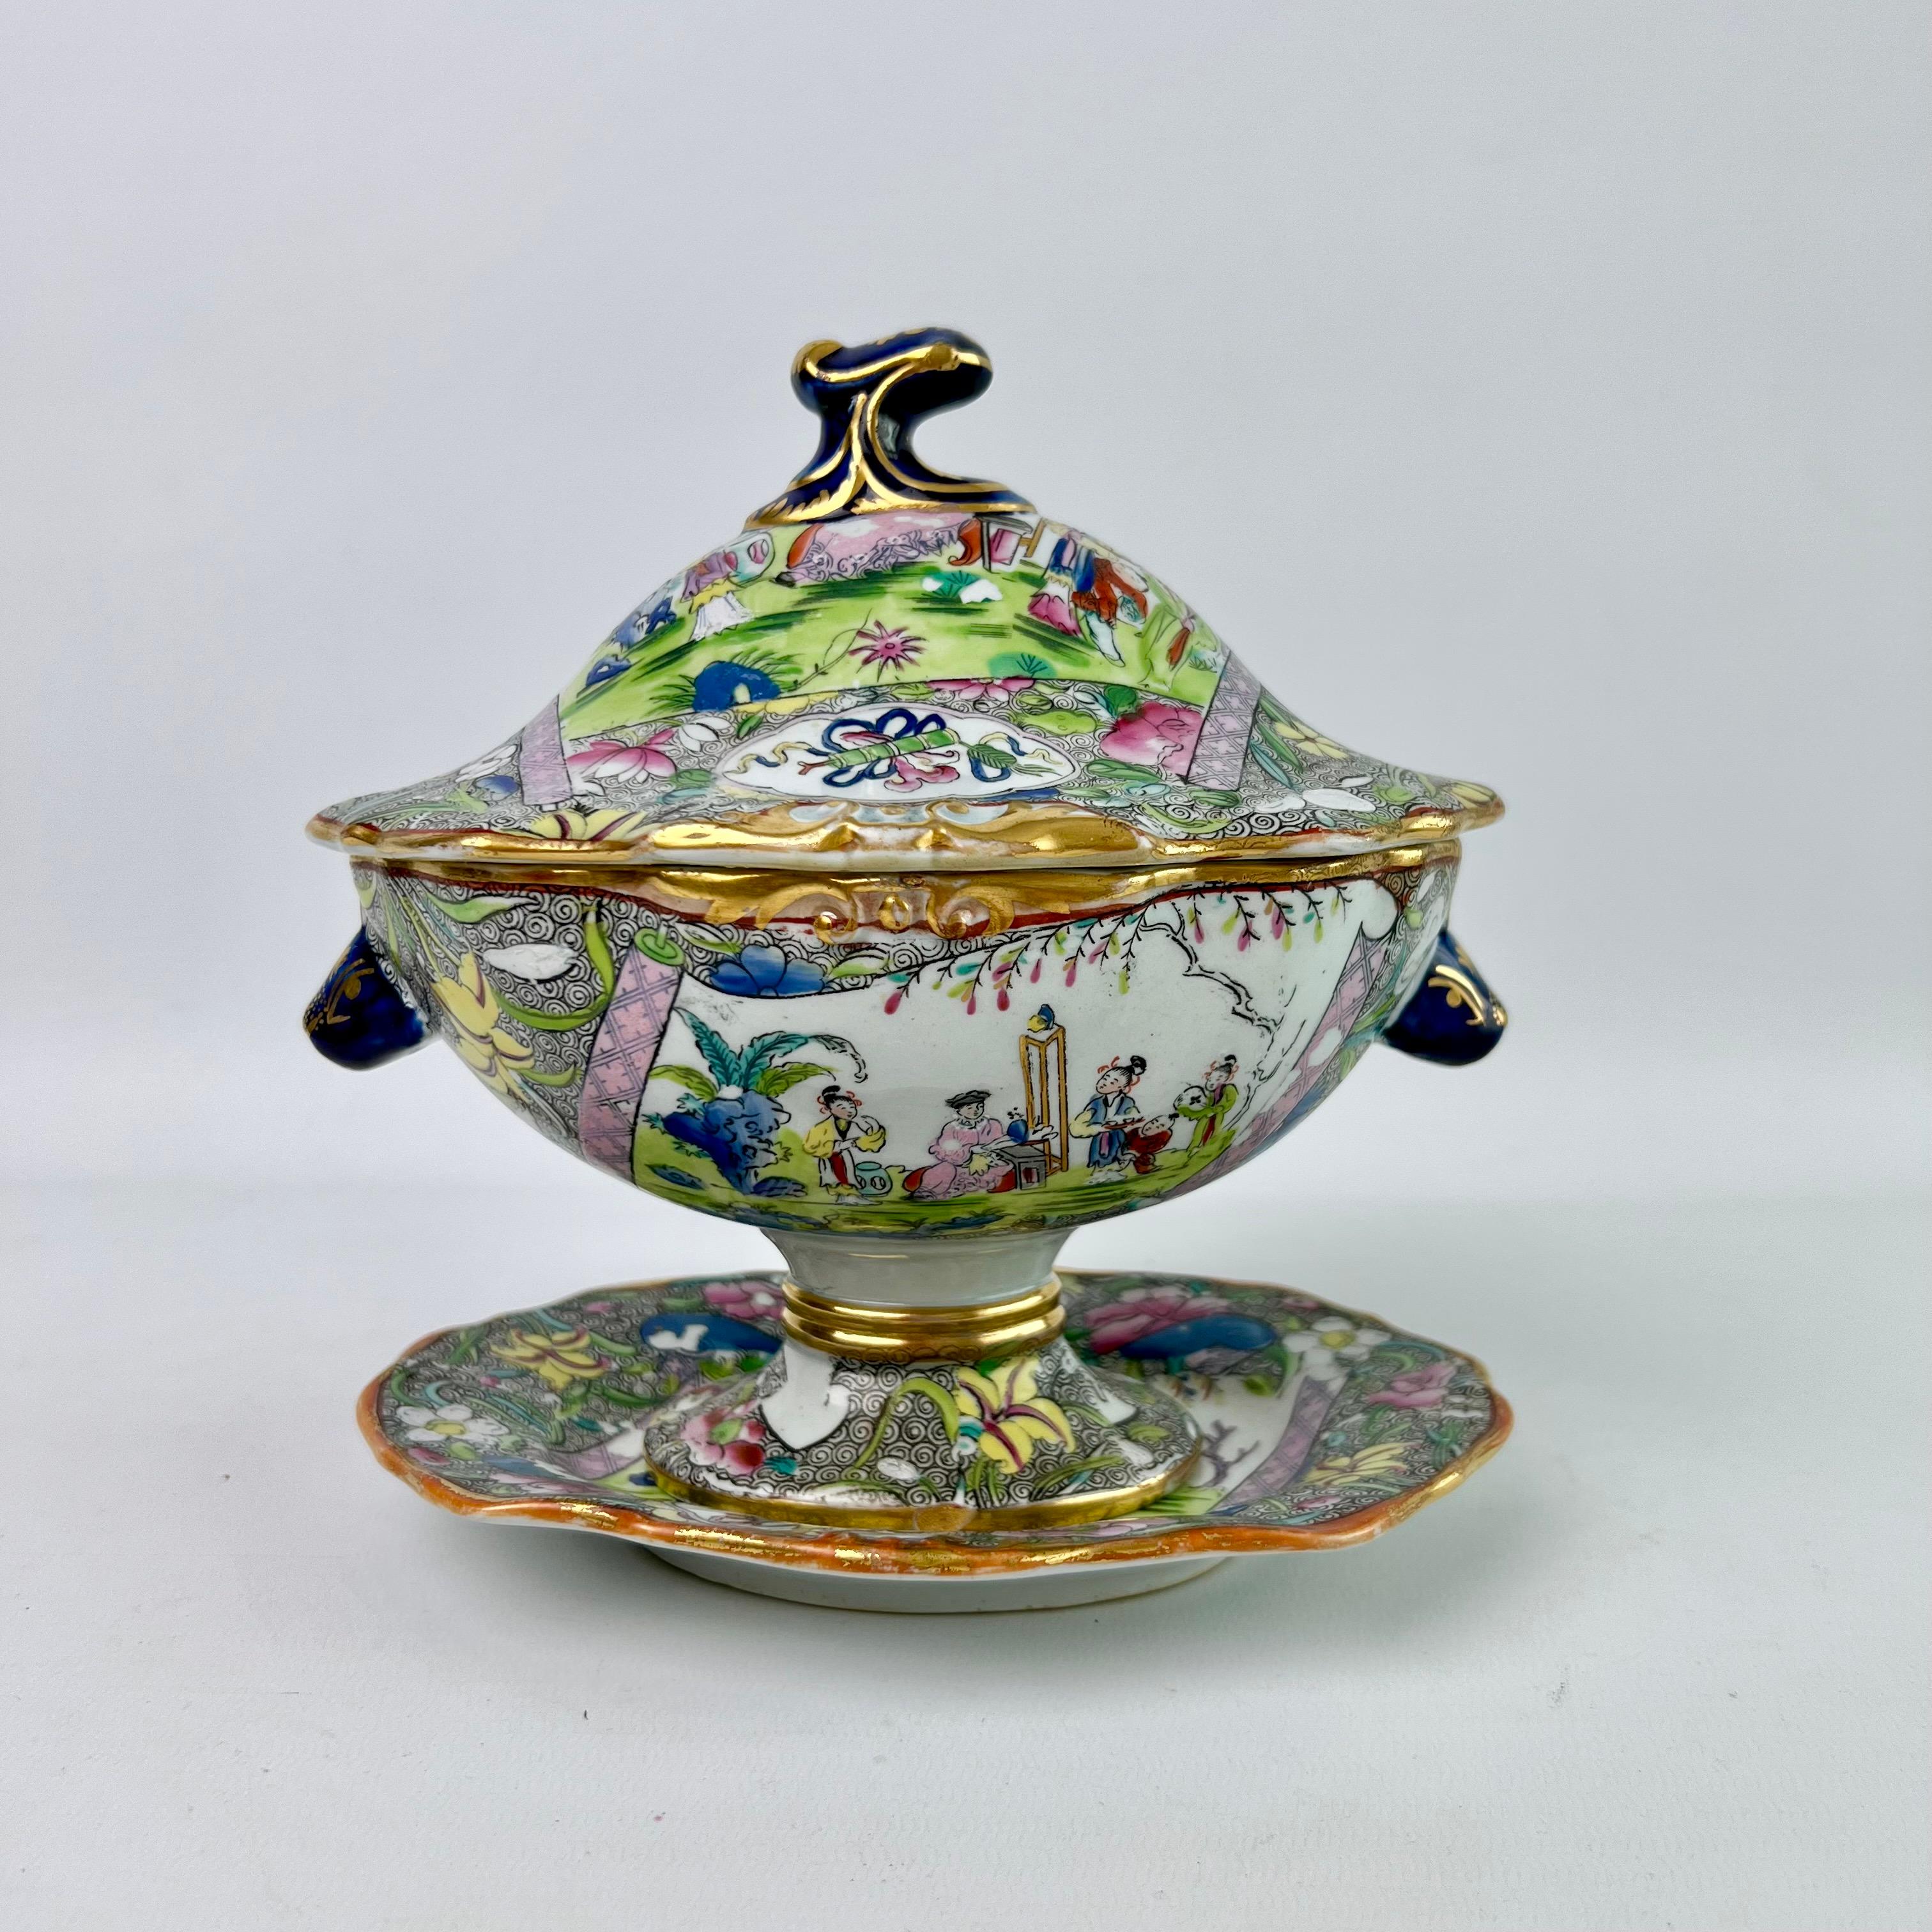 This is a stunning dessert service made by Miles Mason between 1813 and 1820. It is made of Patent Ironstone China, decorated in the very rare 